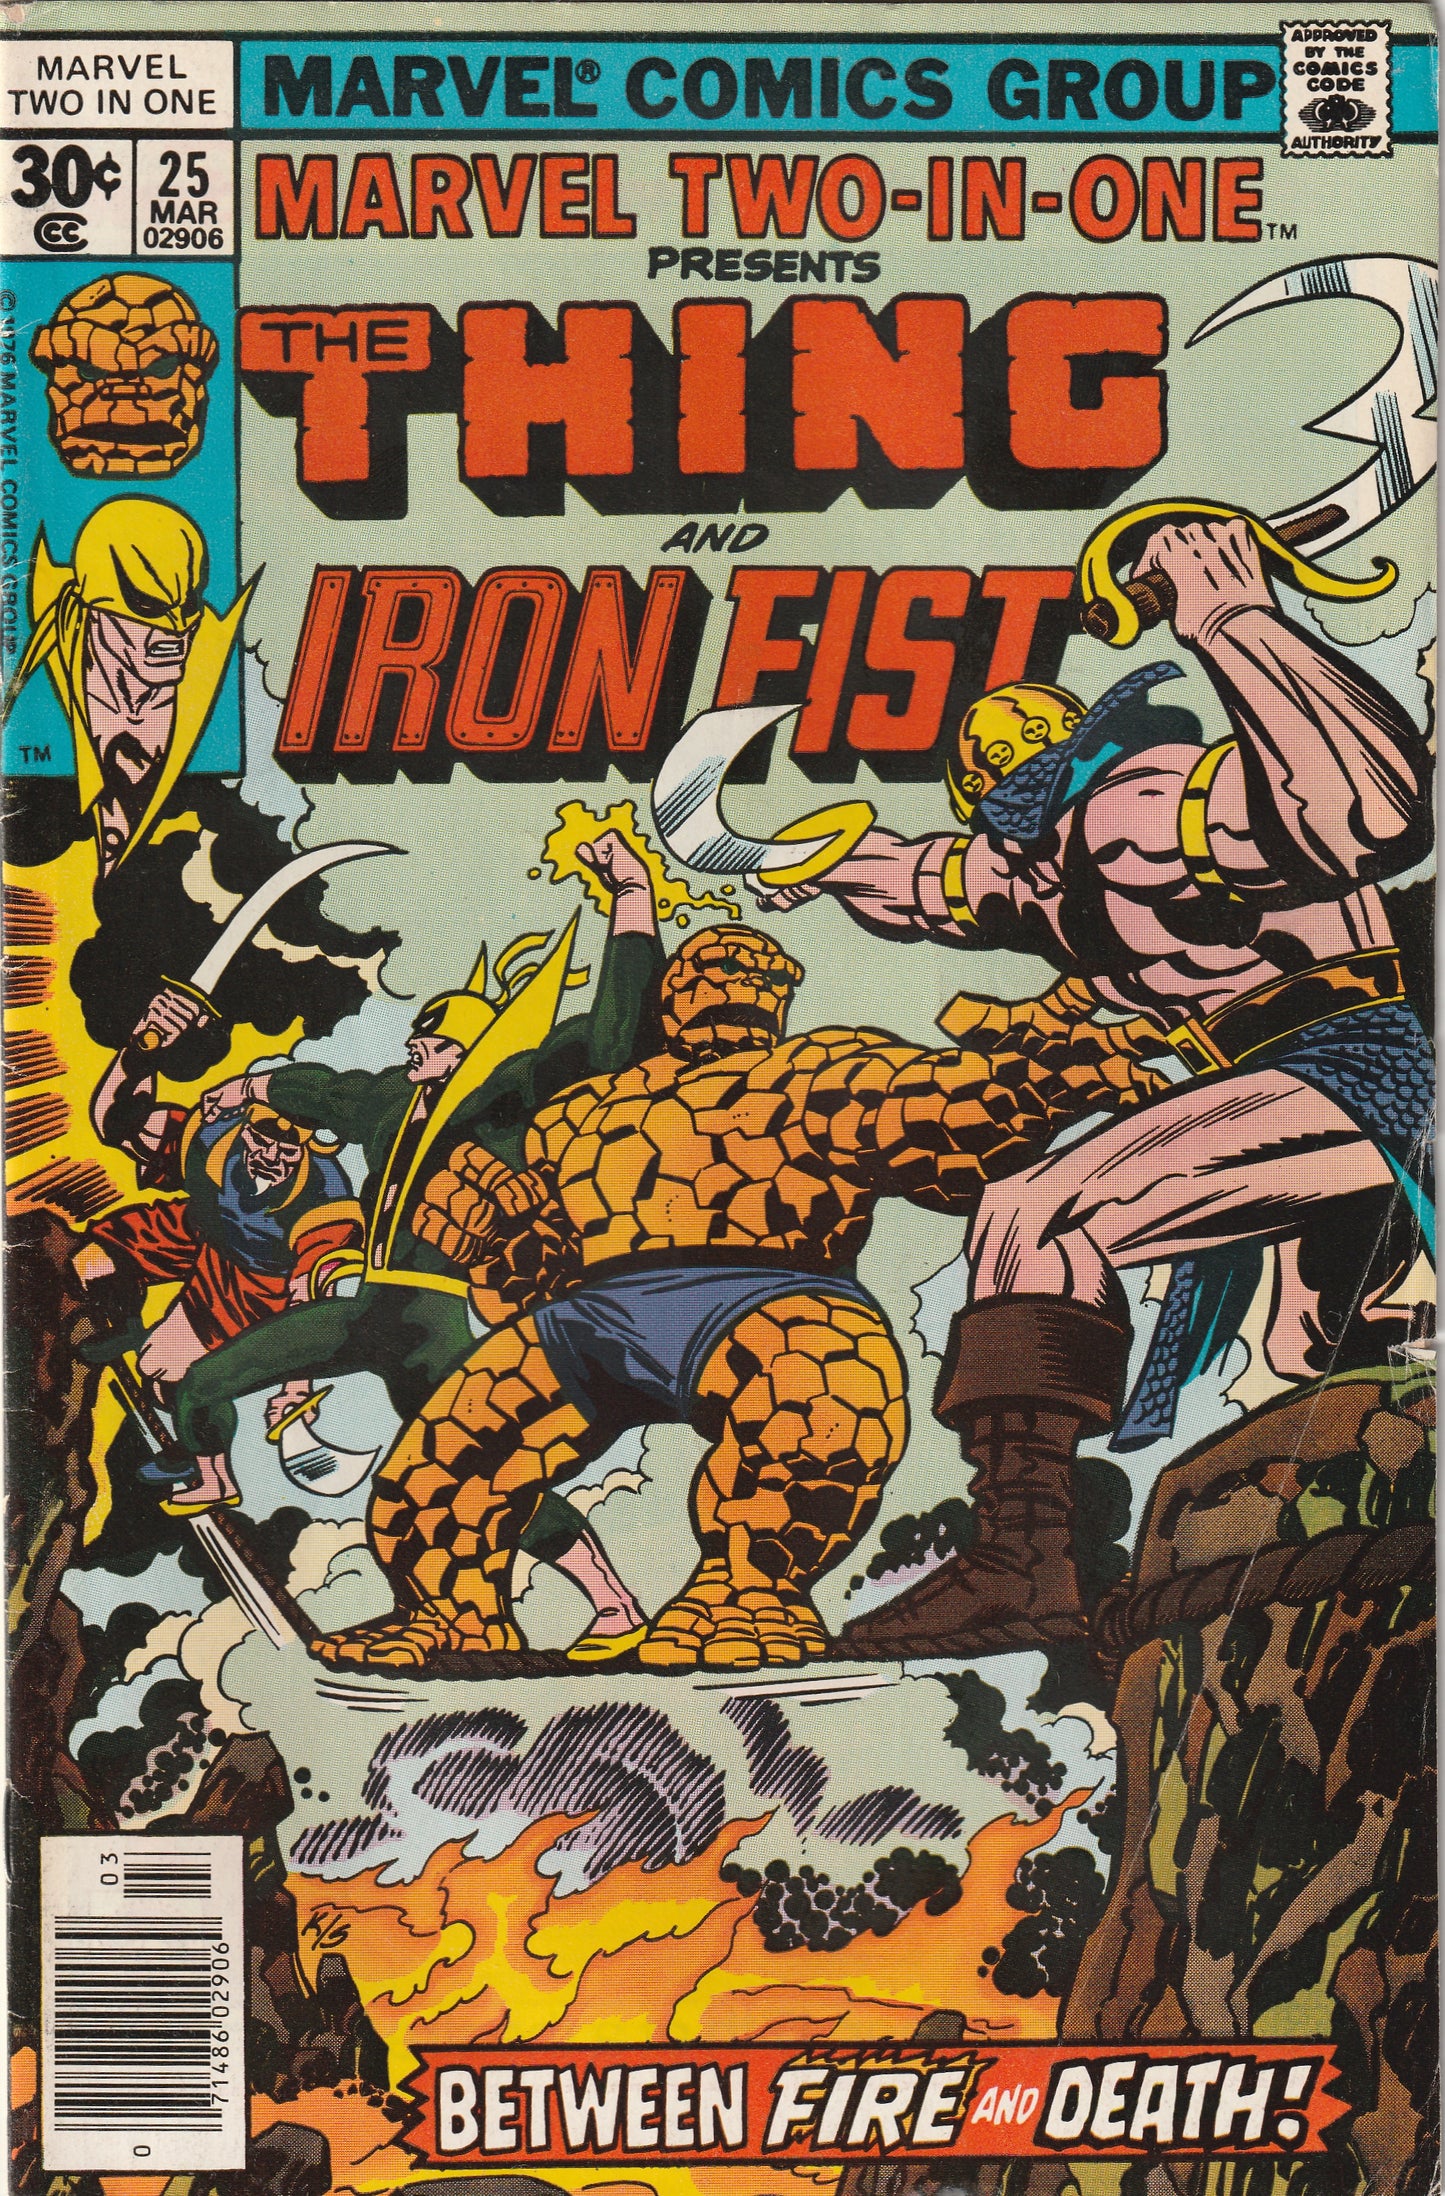 Marvel Two-in-One #25 (1977) - The Thing and Iron Fist